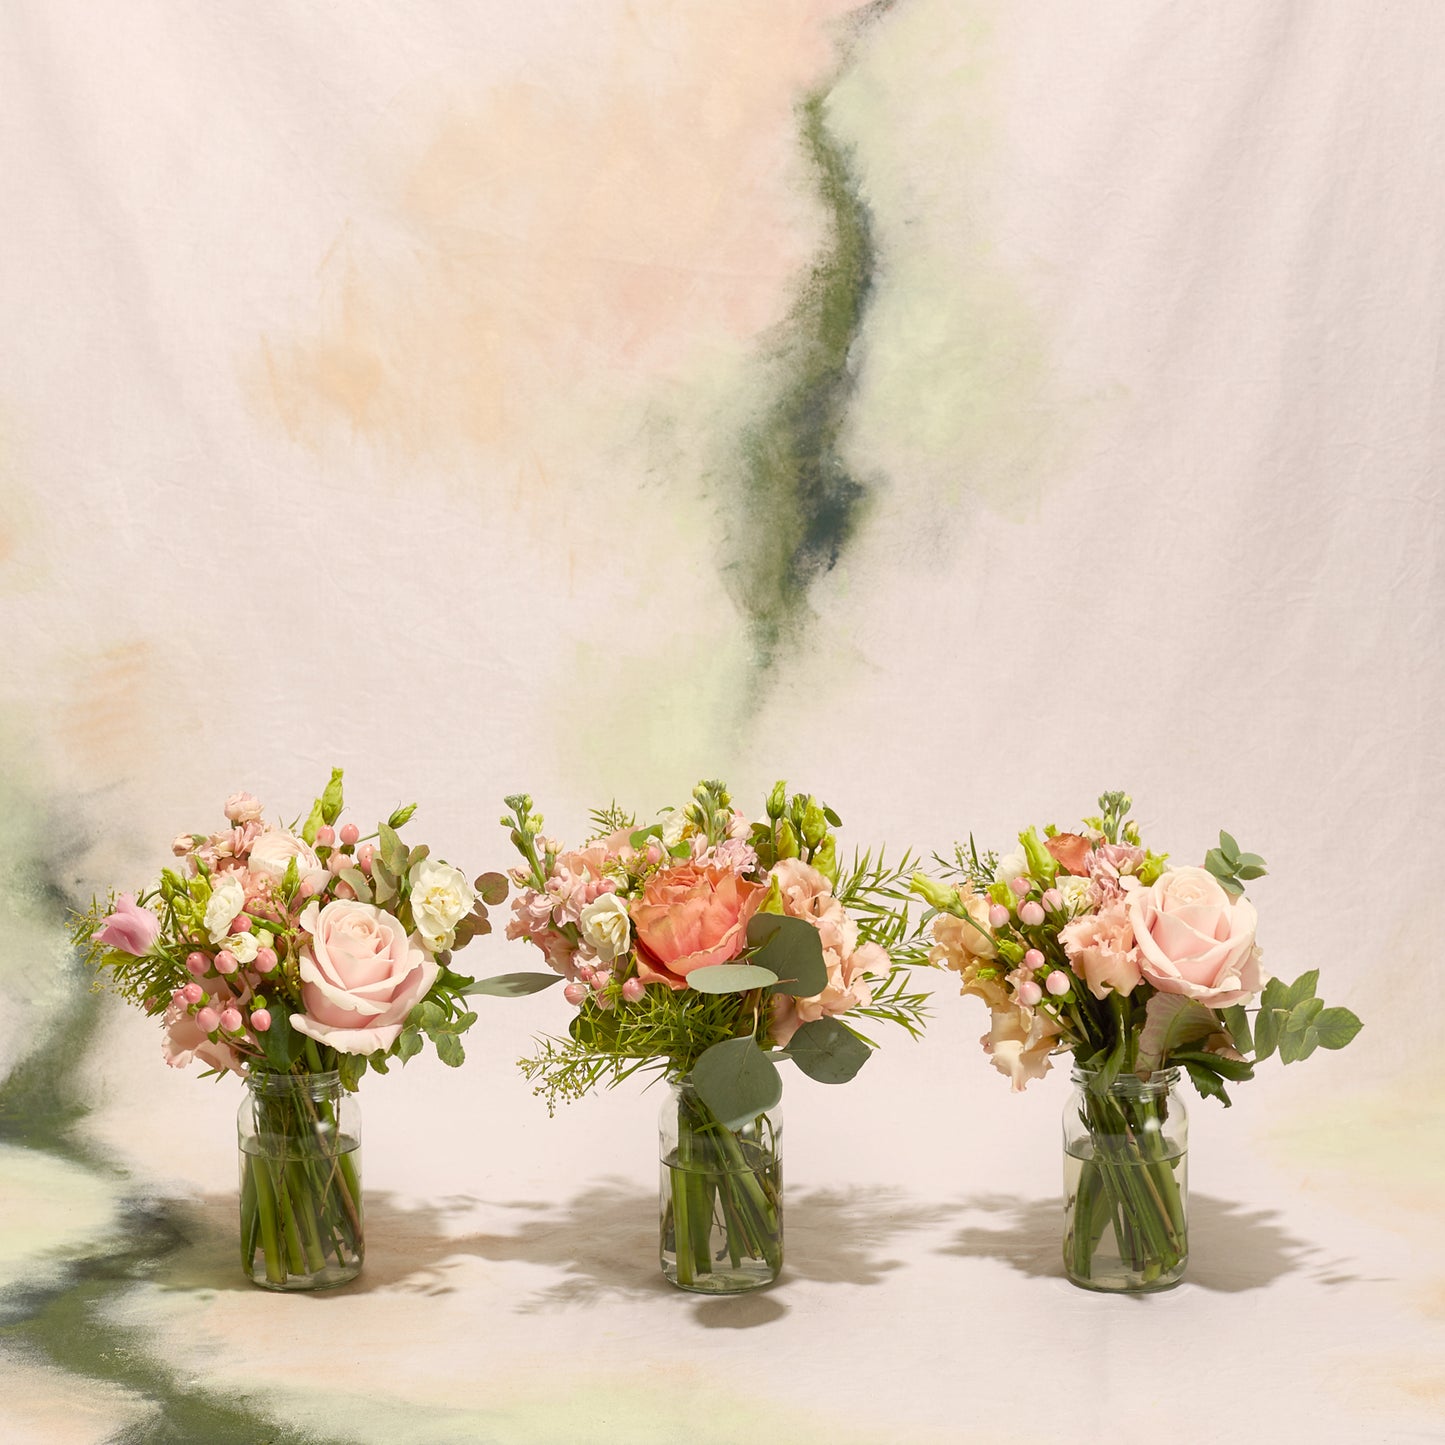 A beautiful bouquet of seasonal blooms in shades of pink, cream and coral. Perfect for bringing a touch of spring into your home or as a thoughtful gift for someone special. 